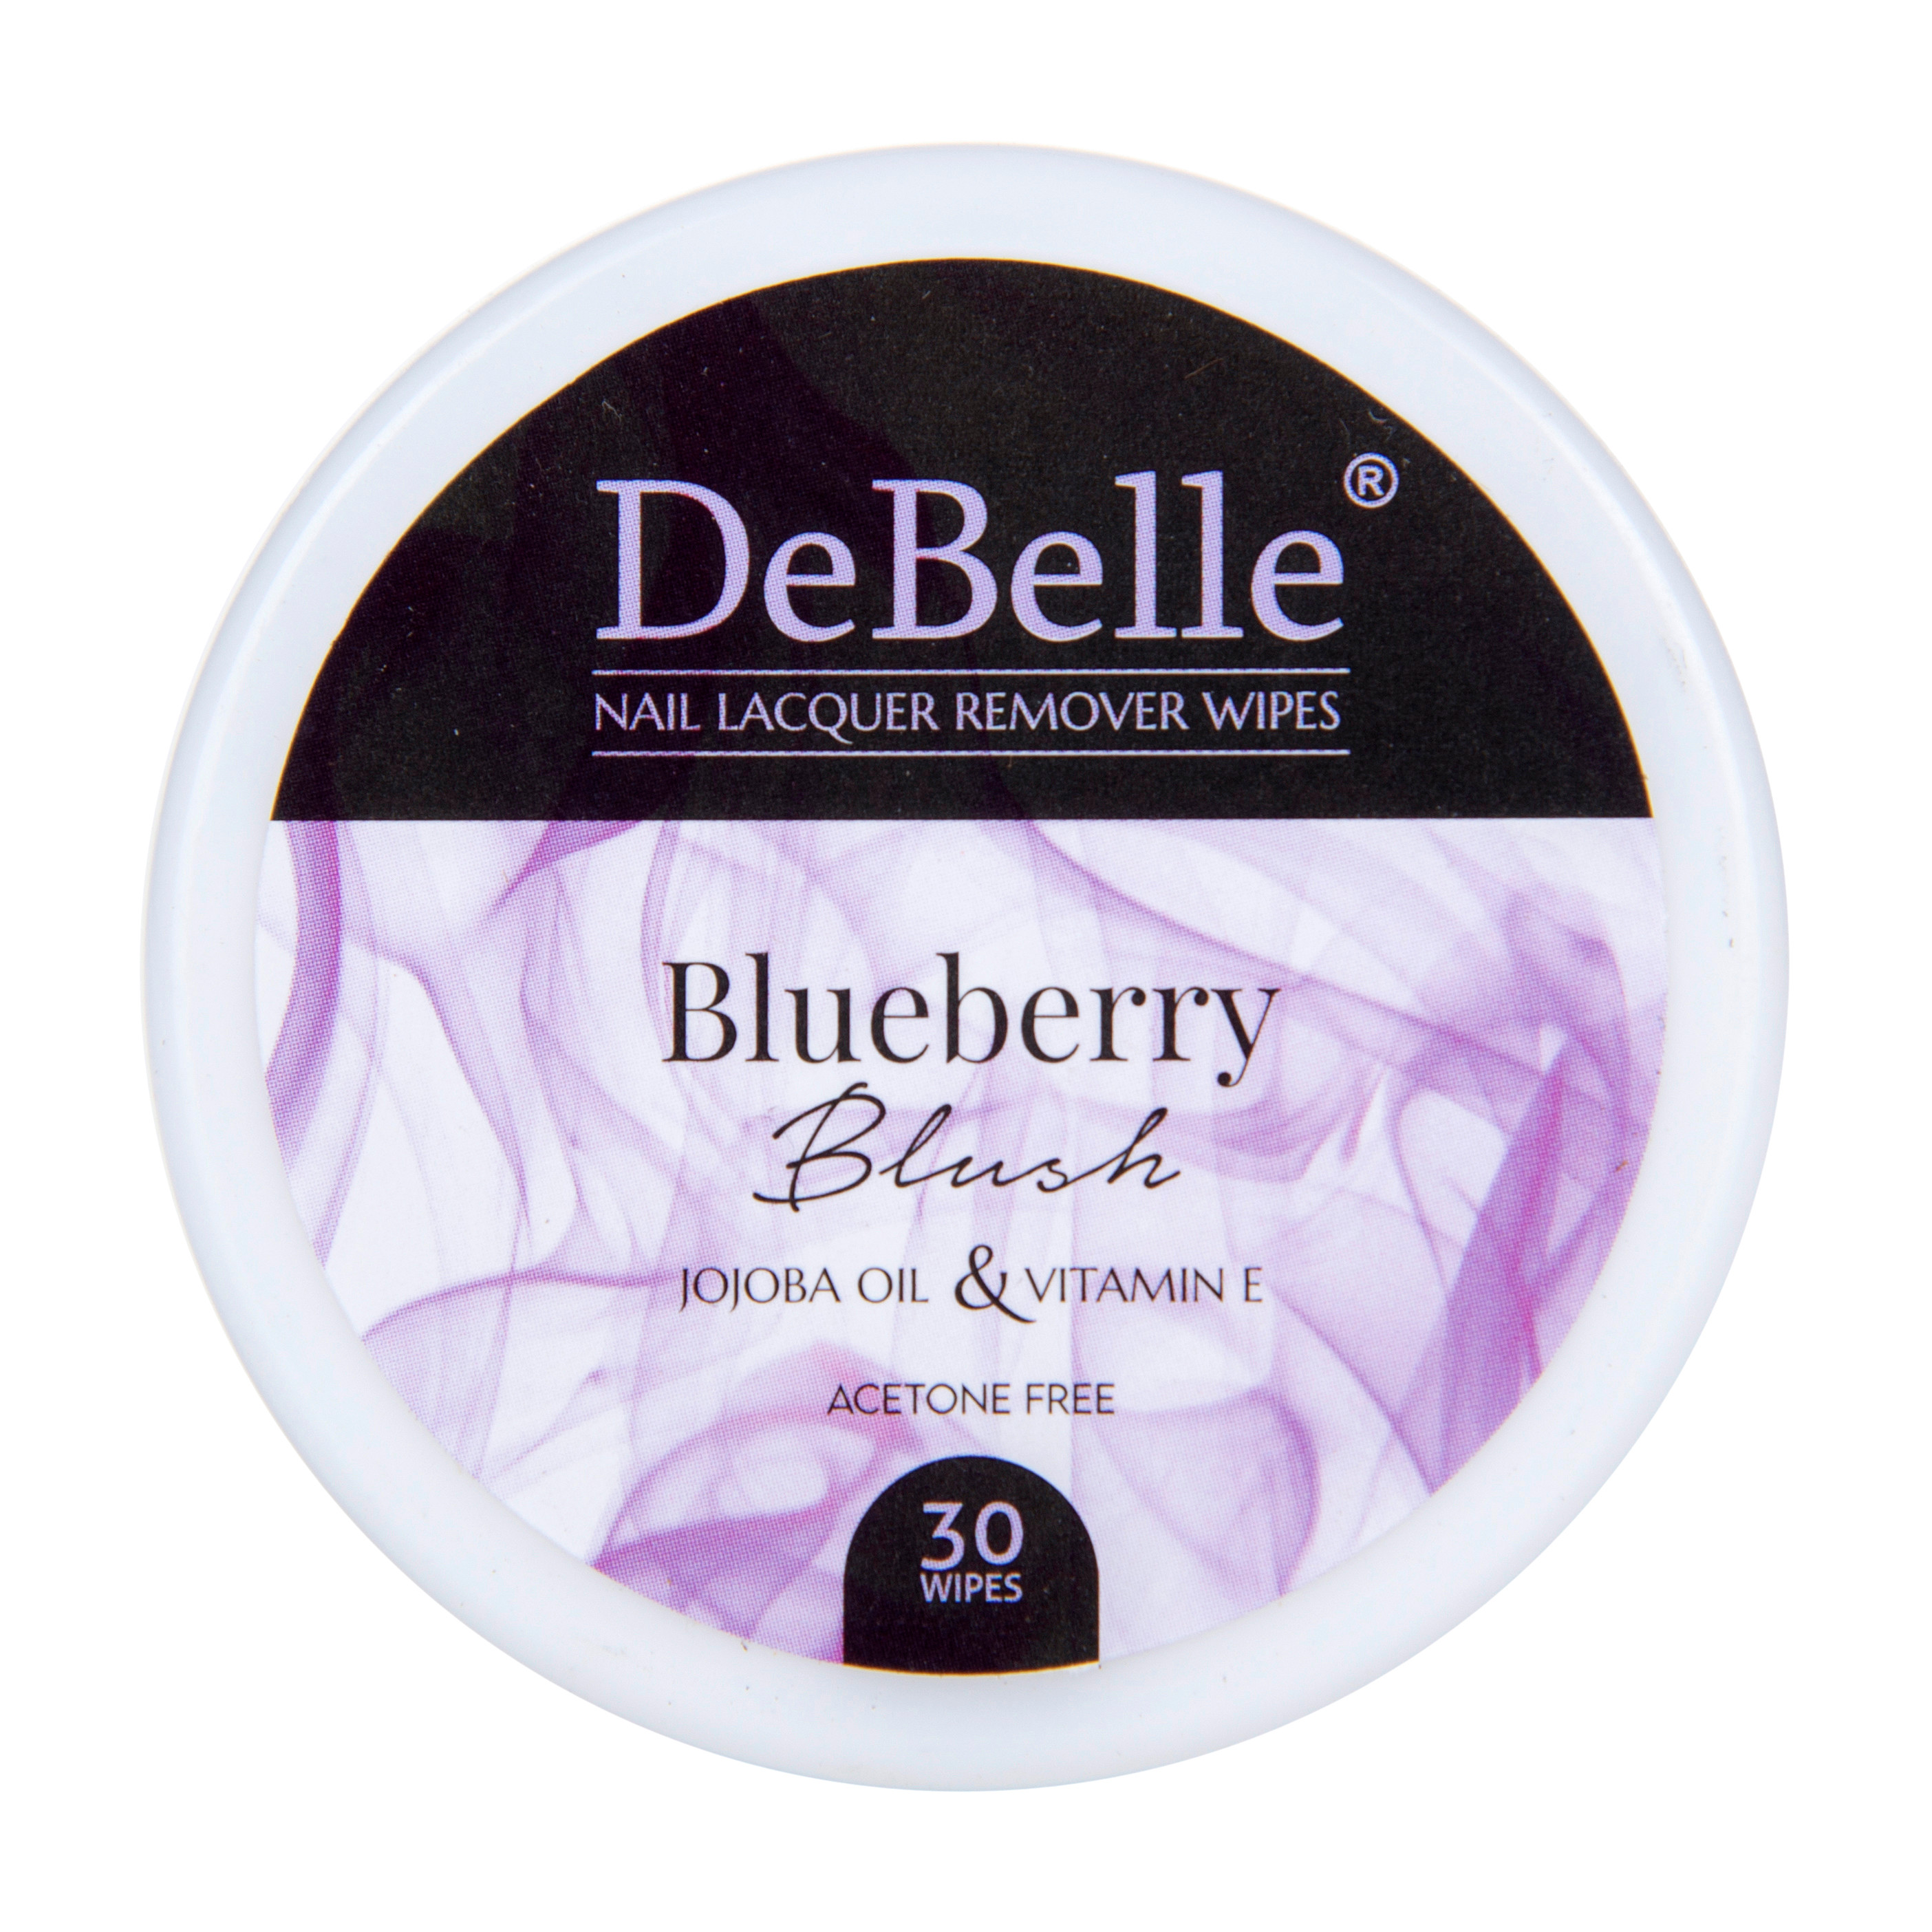 DeBelle Nail Lacquer Remover Wipes Blueberry Blush